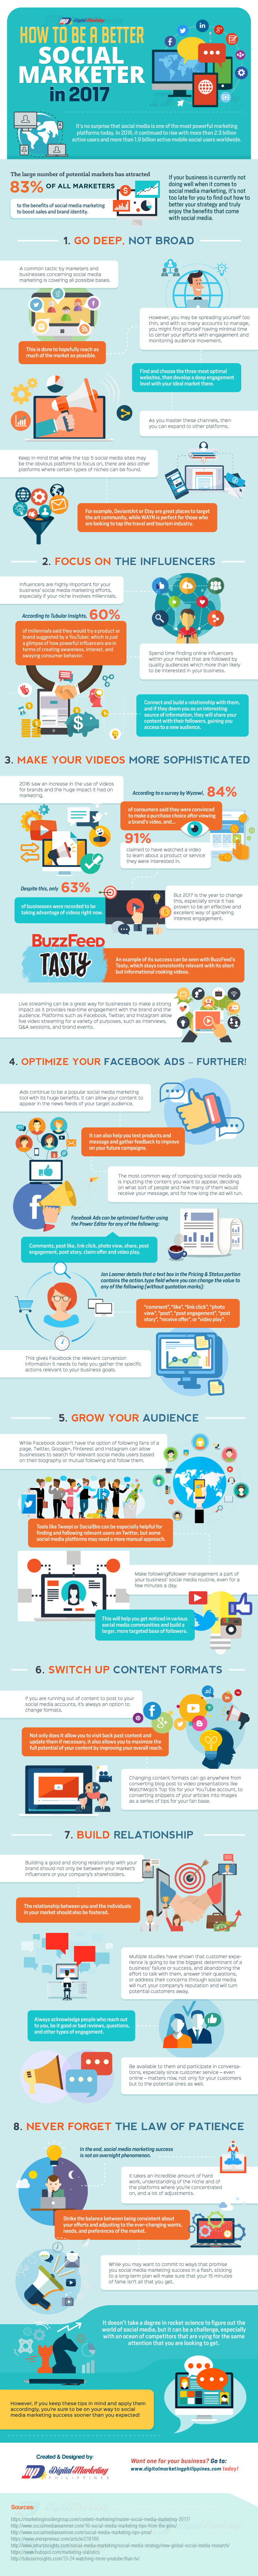 How to Be a Better Social Marketer in 2017 (Infographic) - An Infographic from Digital Marketing Philippines